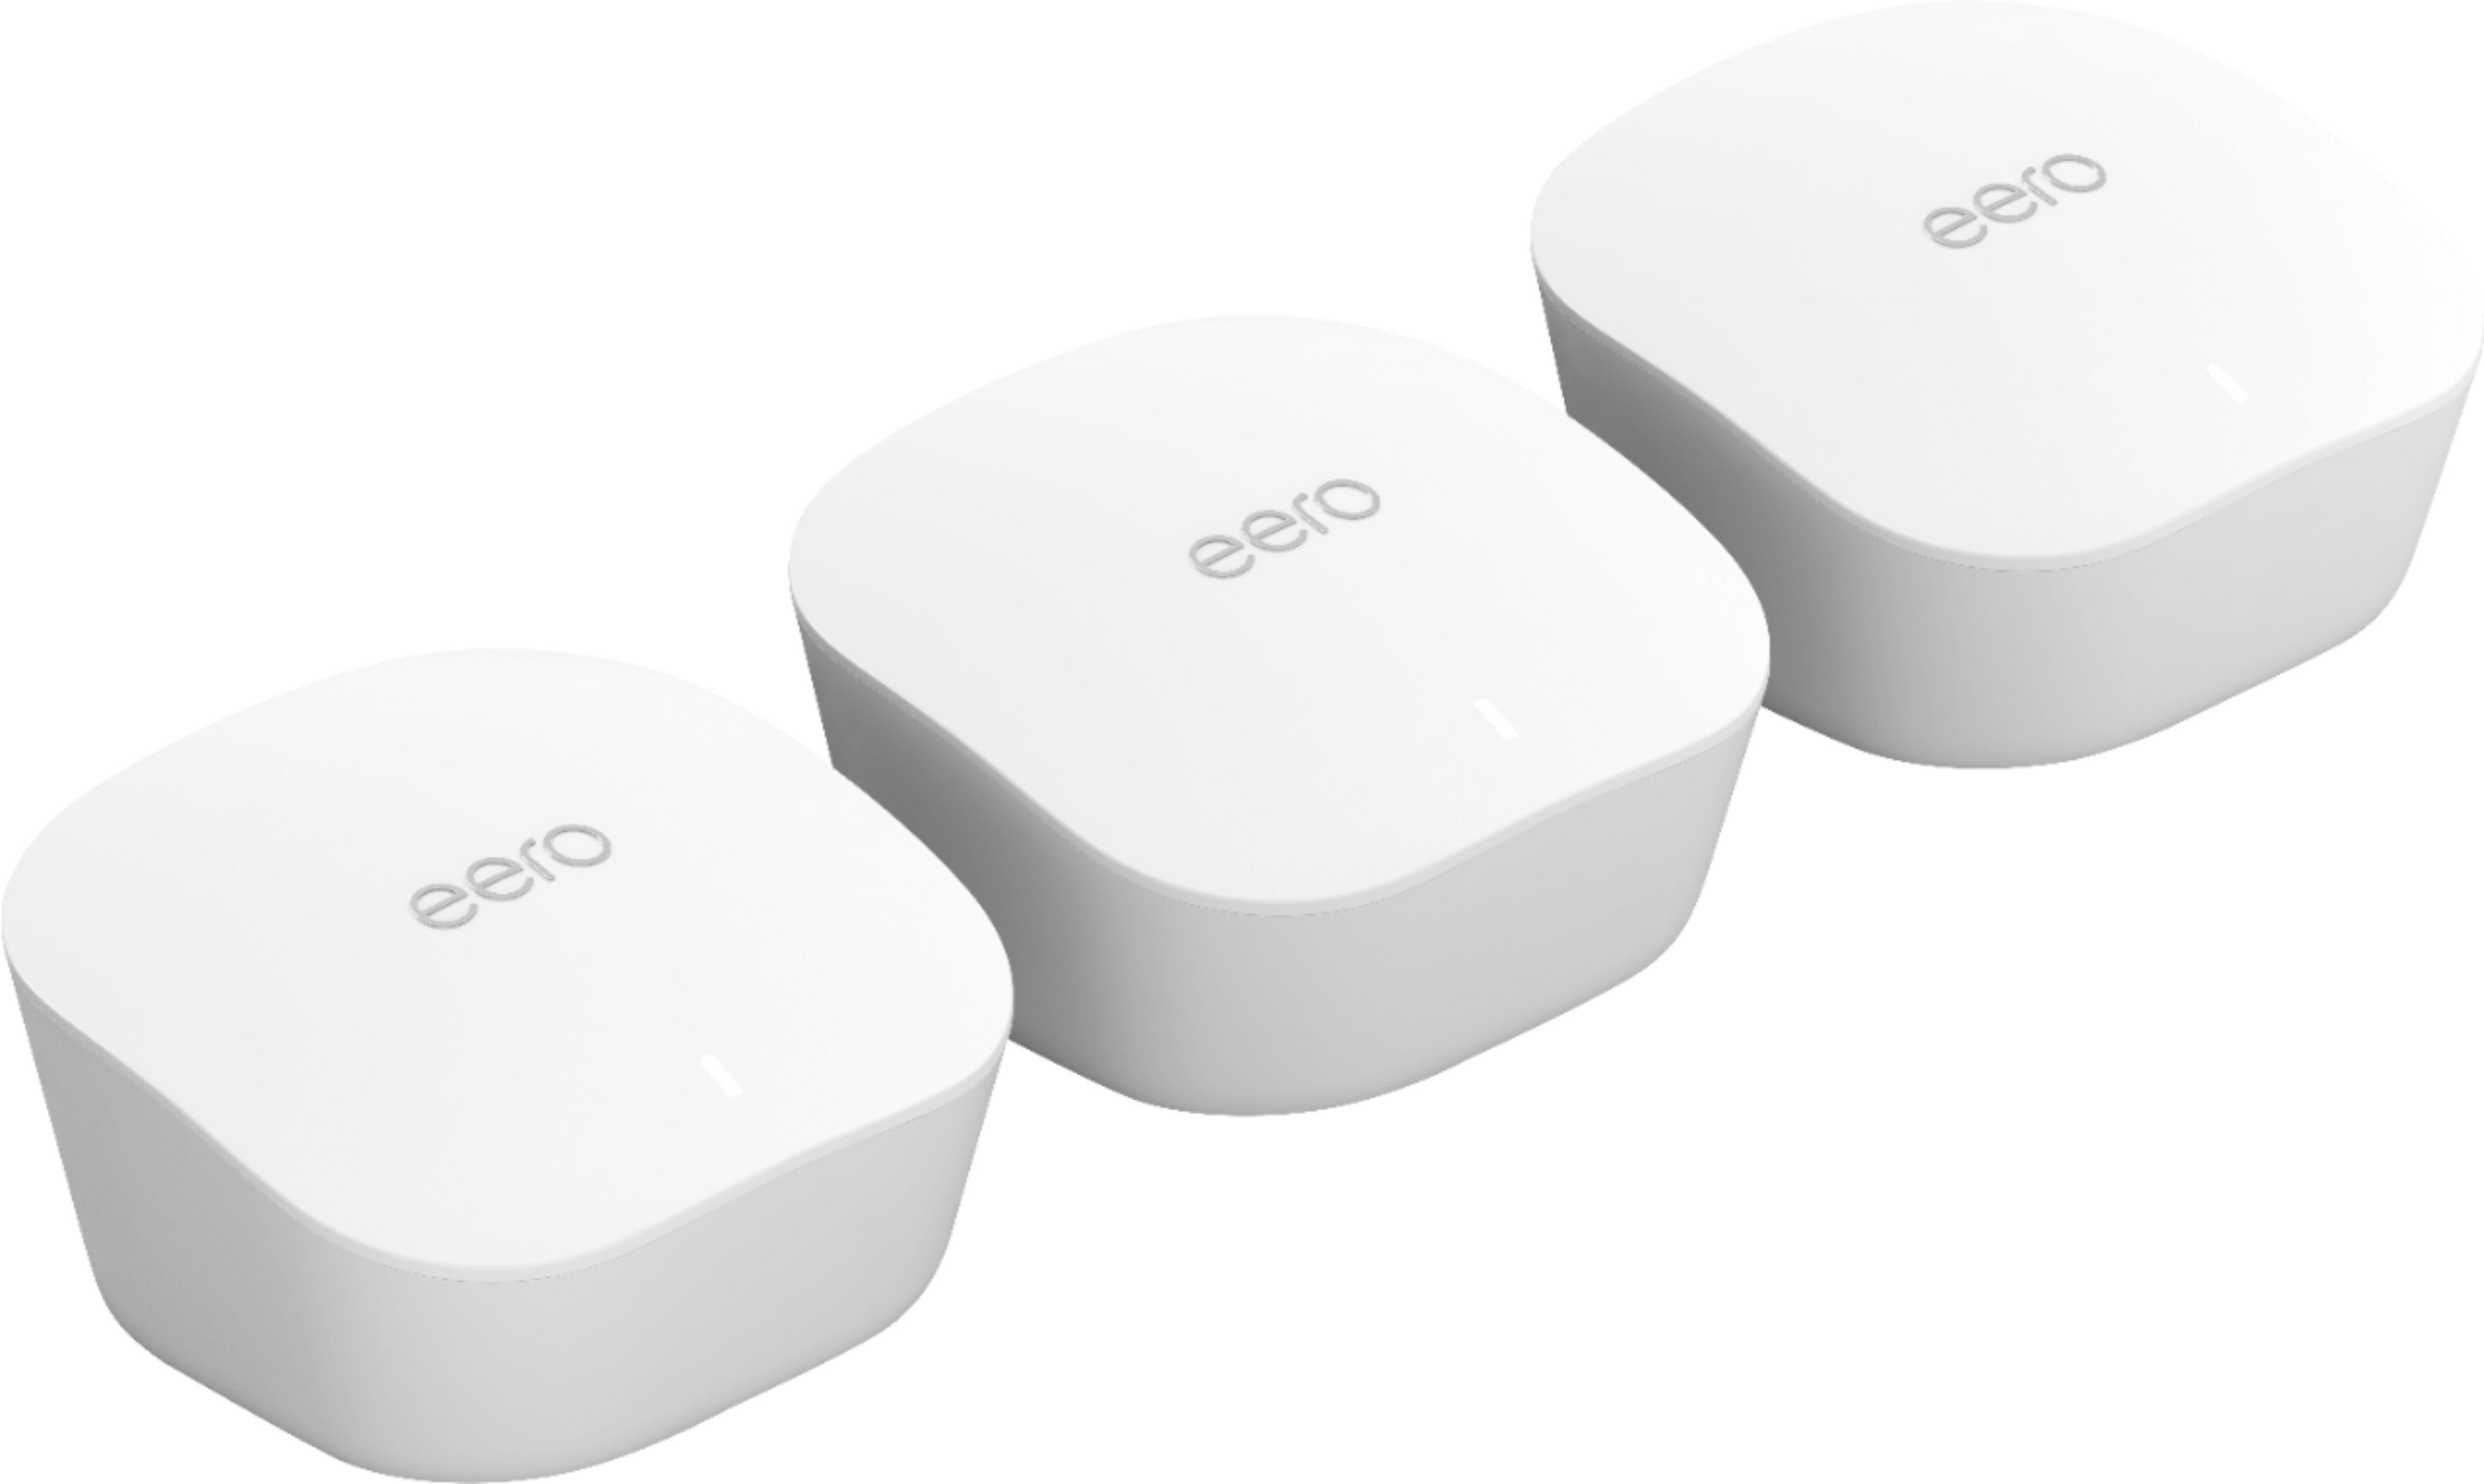 eero Dual-Band Mesh Wifi System with Amazon Echo Show 5 for $199.99 Shipped